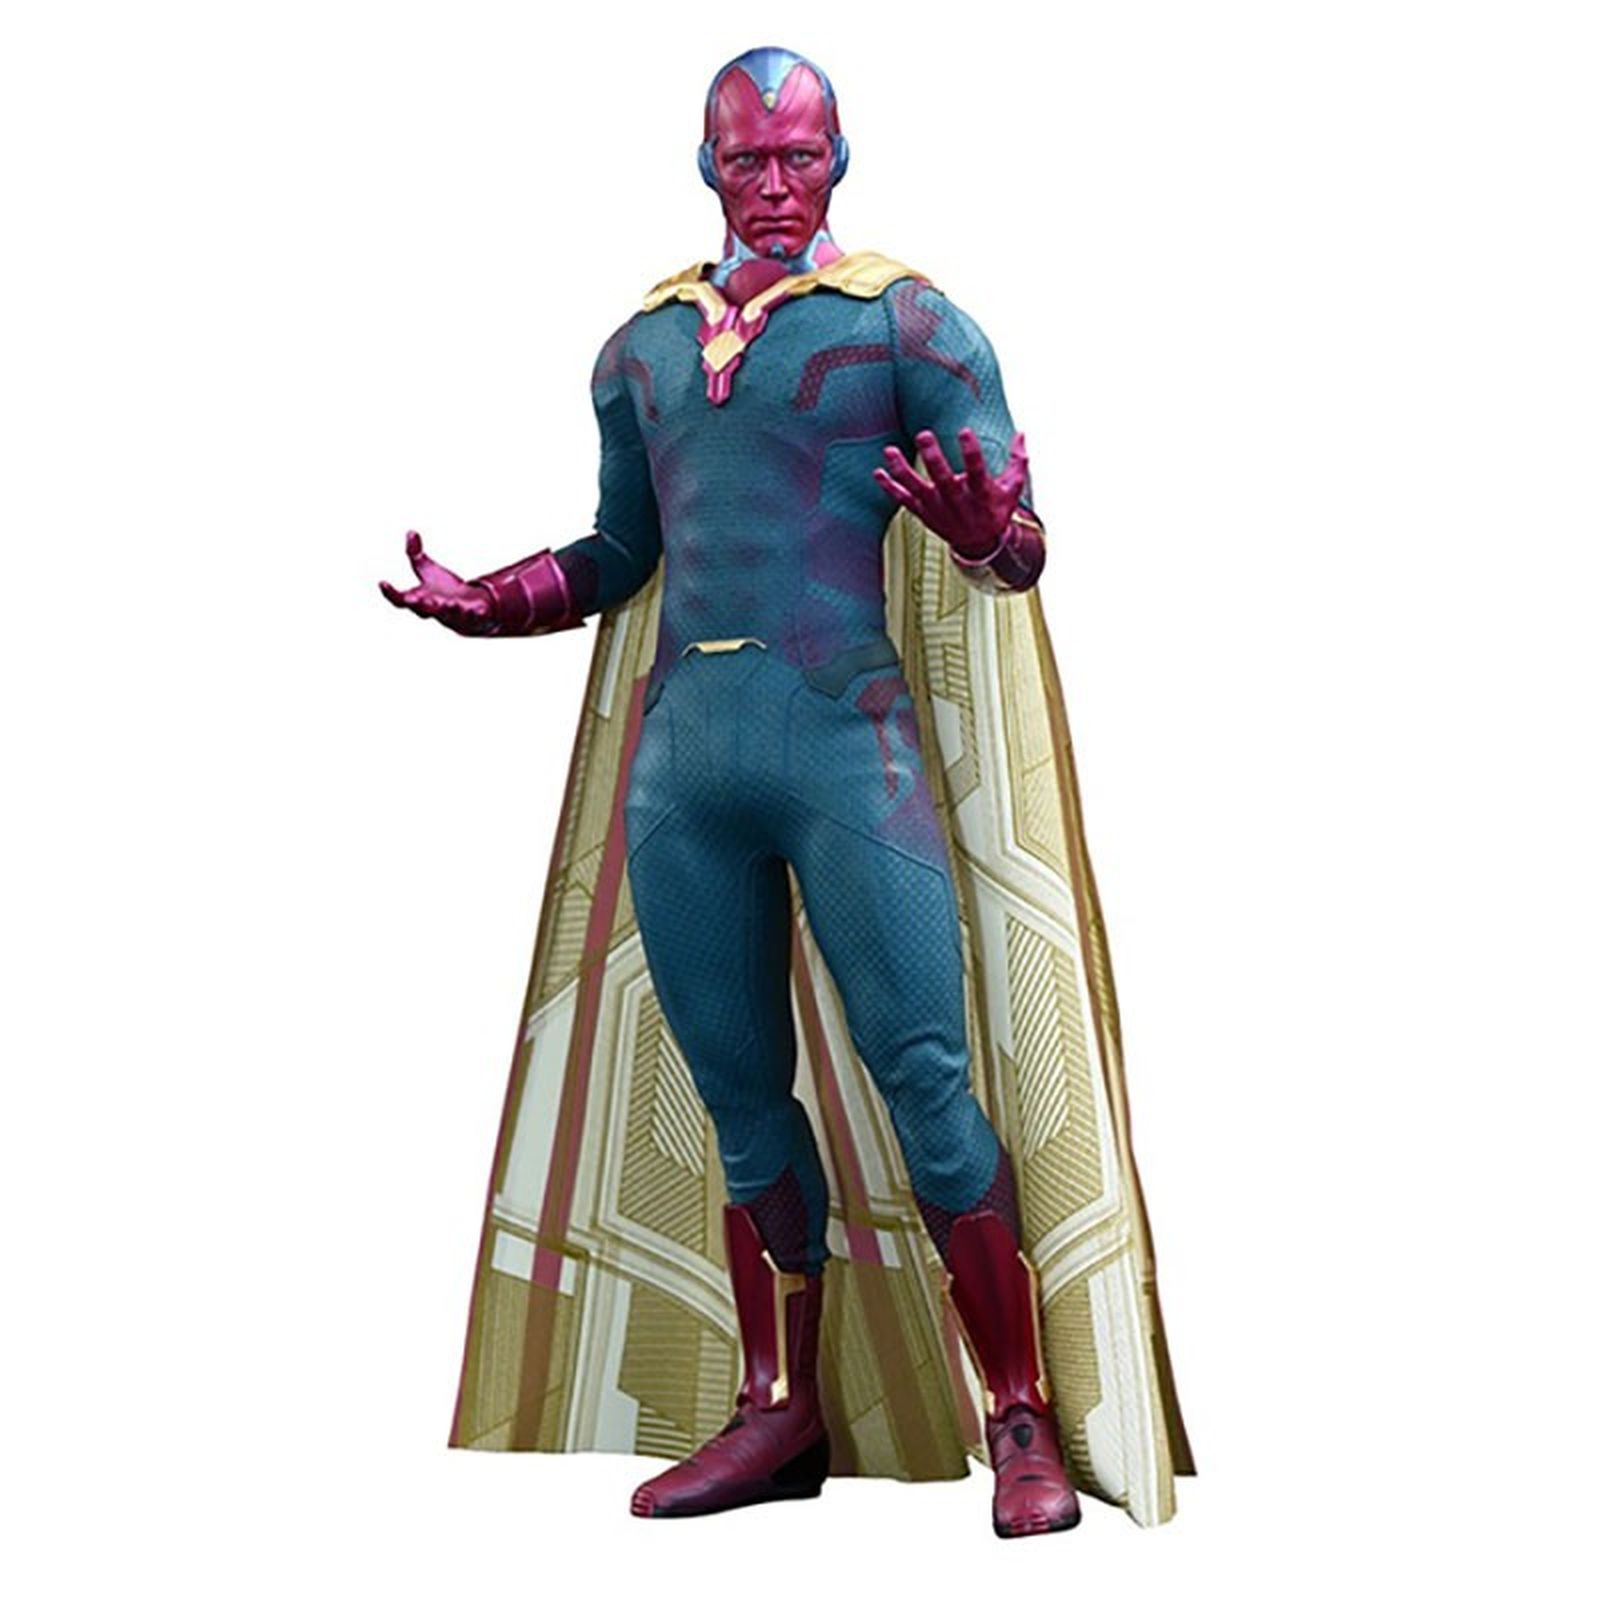 VISION FIGURA 31 CM AVENGERS AGE OF ULTRON MARVEL SIXTH SCALE HOT TOY